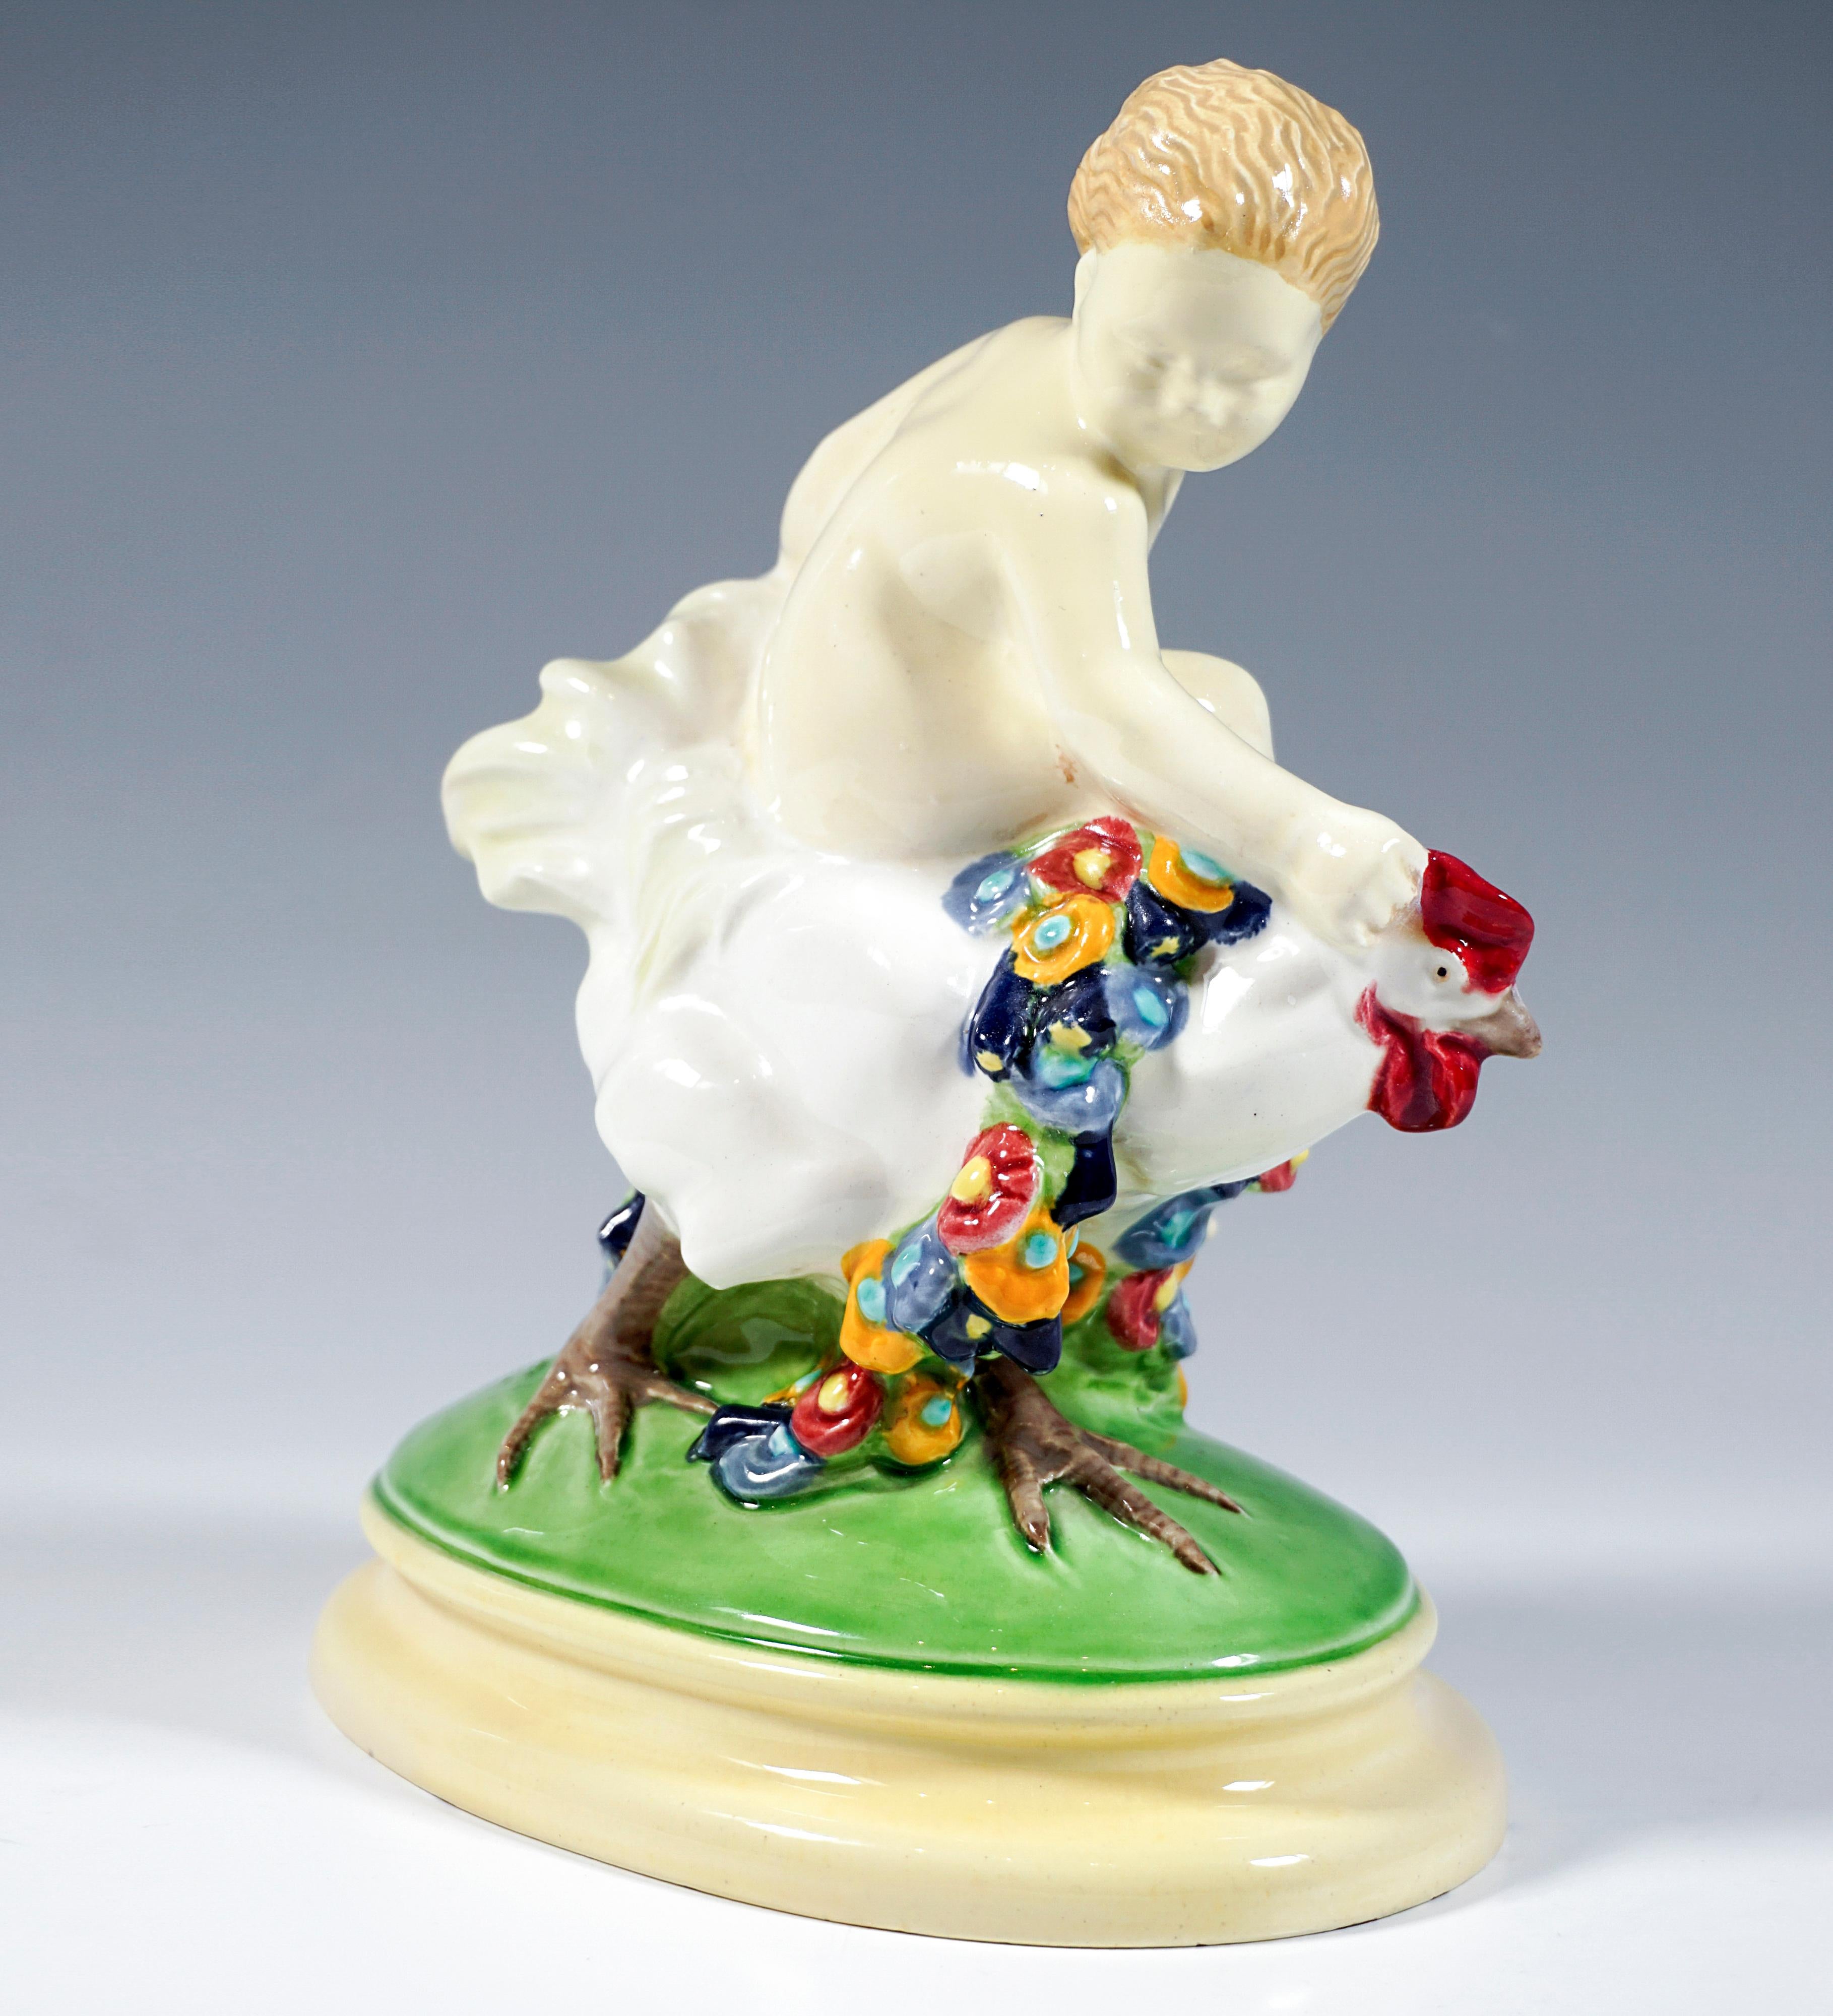 Excellent Viennese Art Nouveau Ceramic Piece:
Blond boy sitting sideways on a rooster decorated with colourful flower garlands and holding on to its comb and plumage.
The group is based on an oval, green and cream painted, stepped plinth, artist's